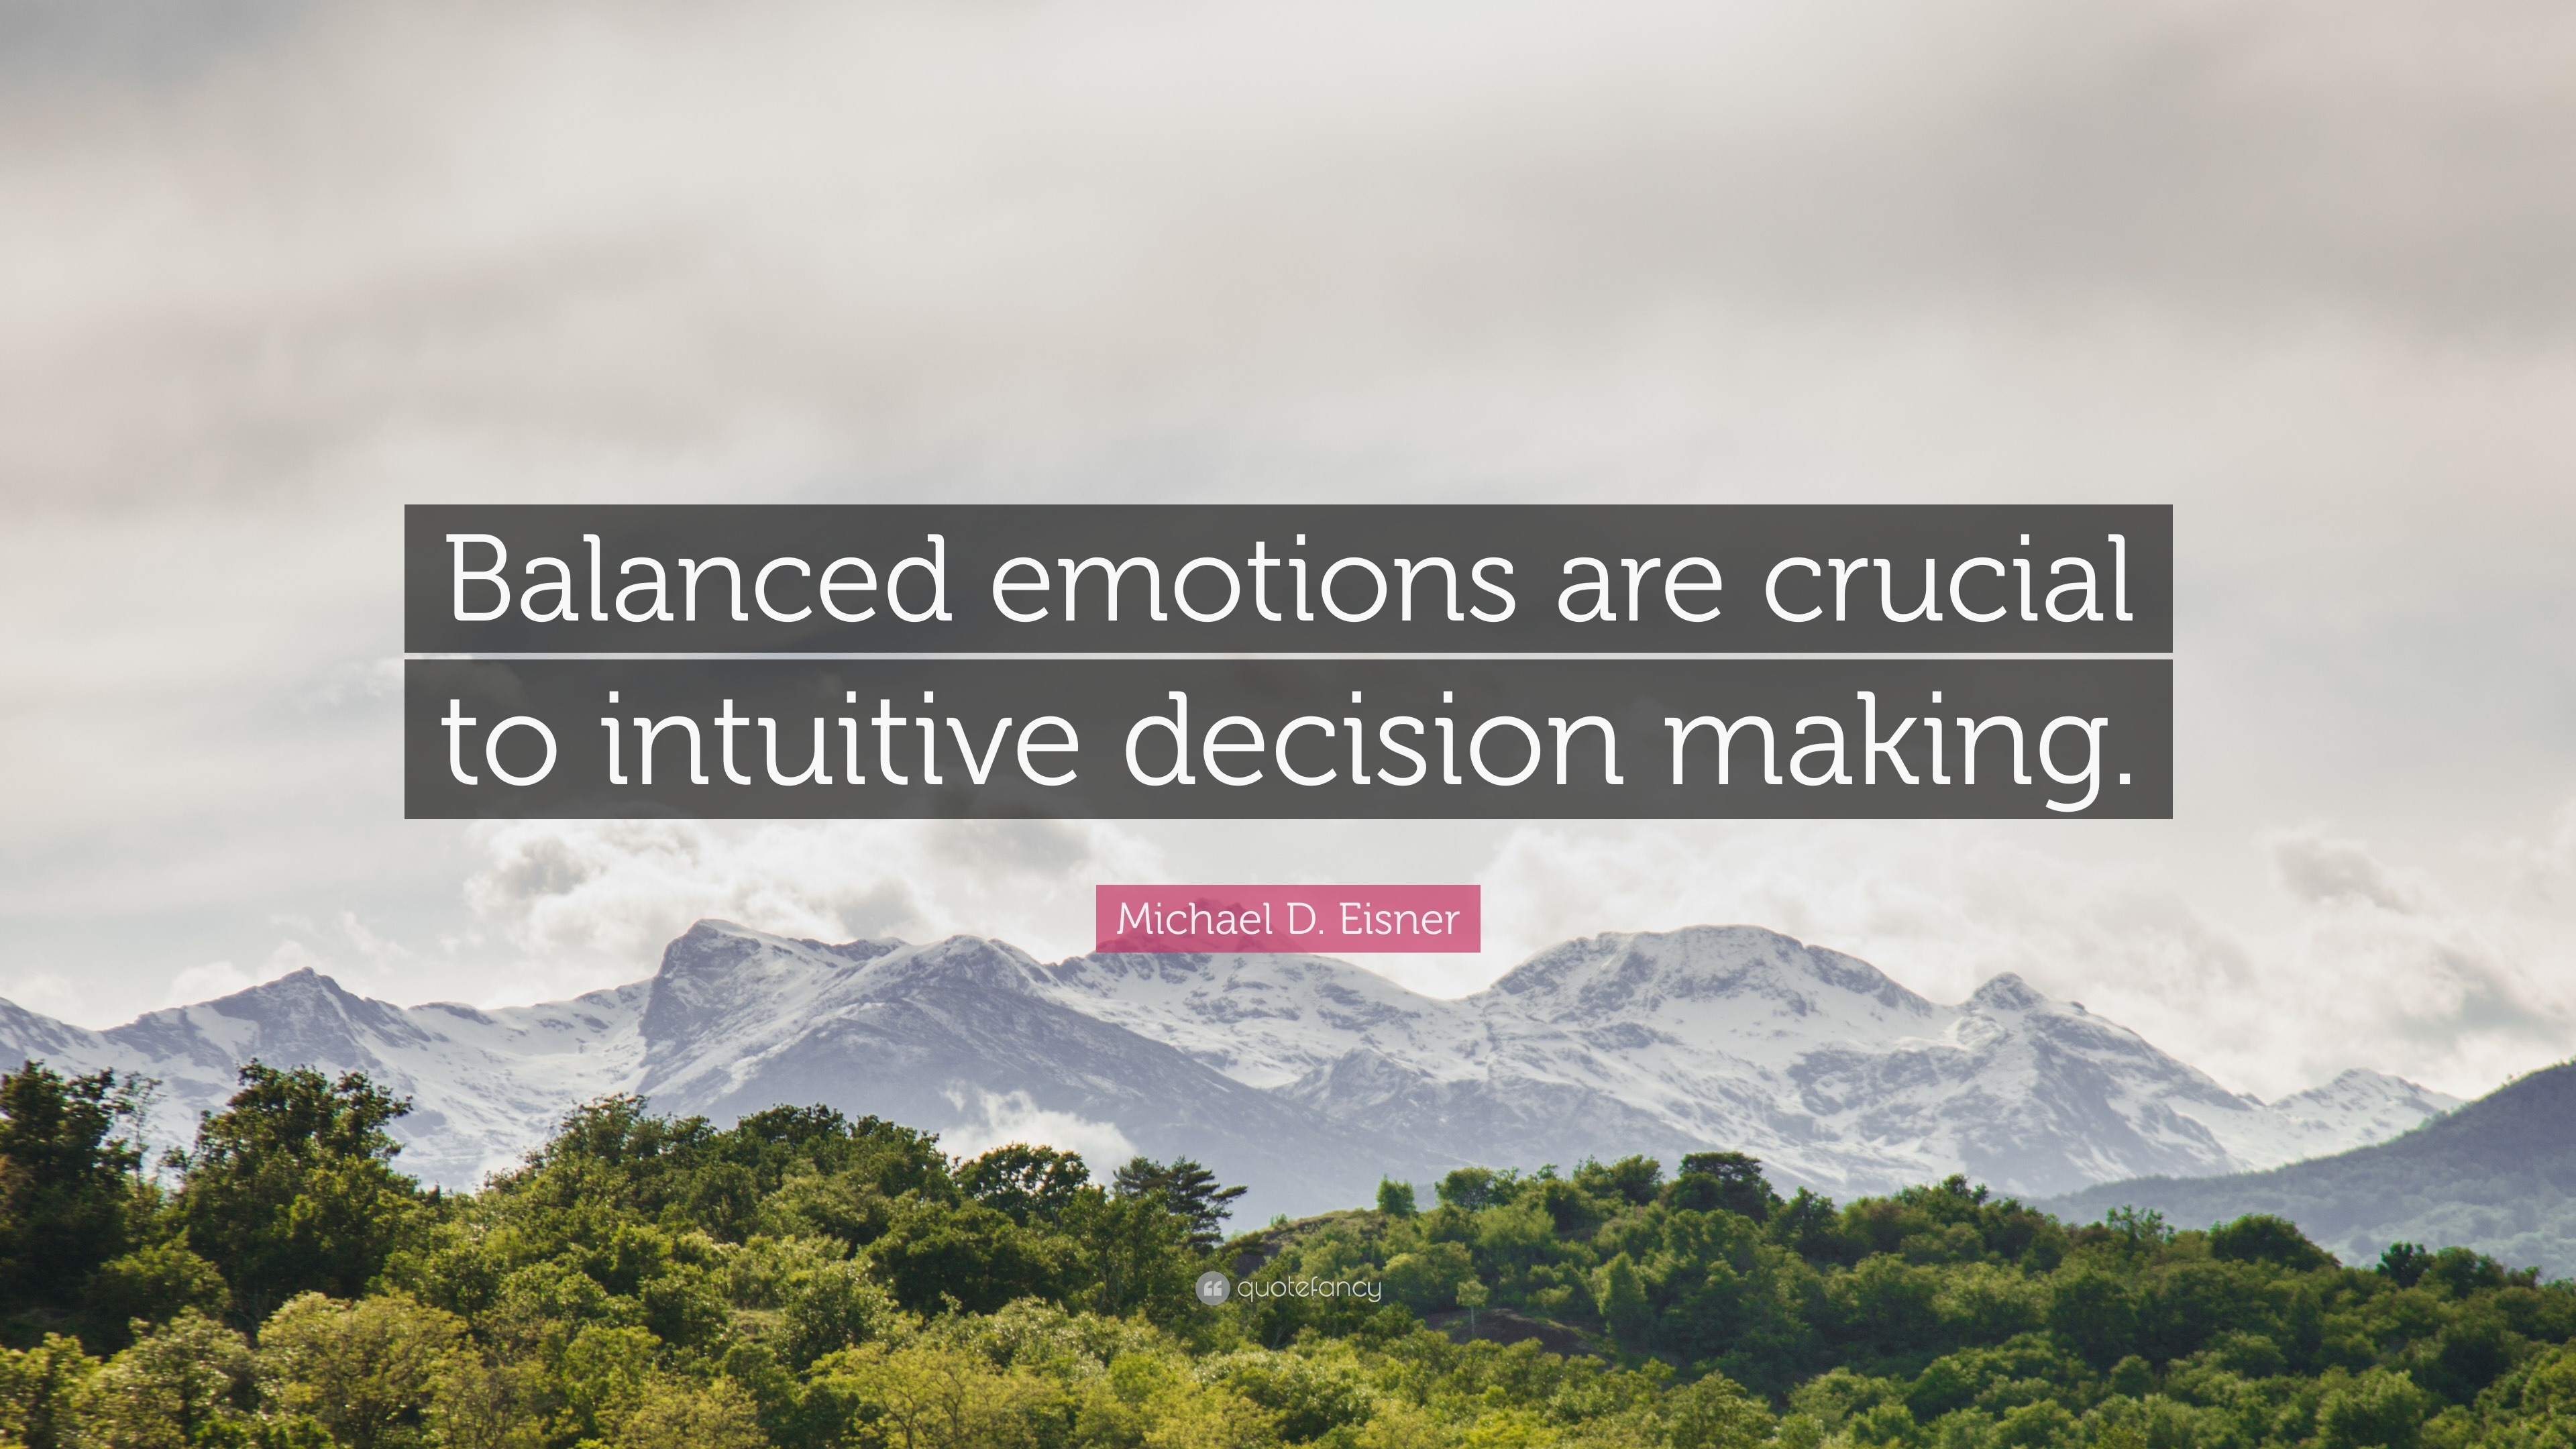 Michael D Eisner Quote “Balanced emotions are crucial to intuitive decision making